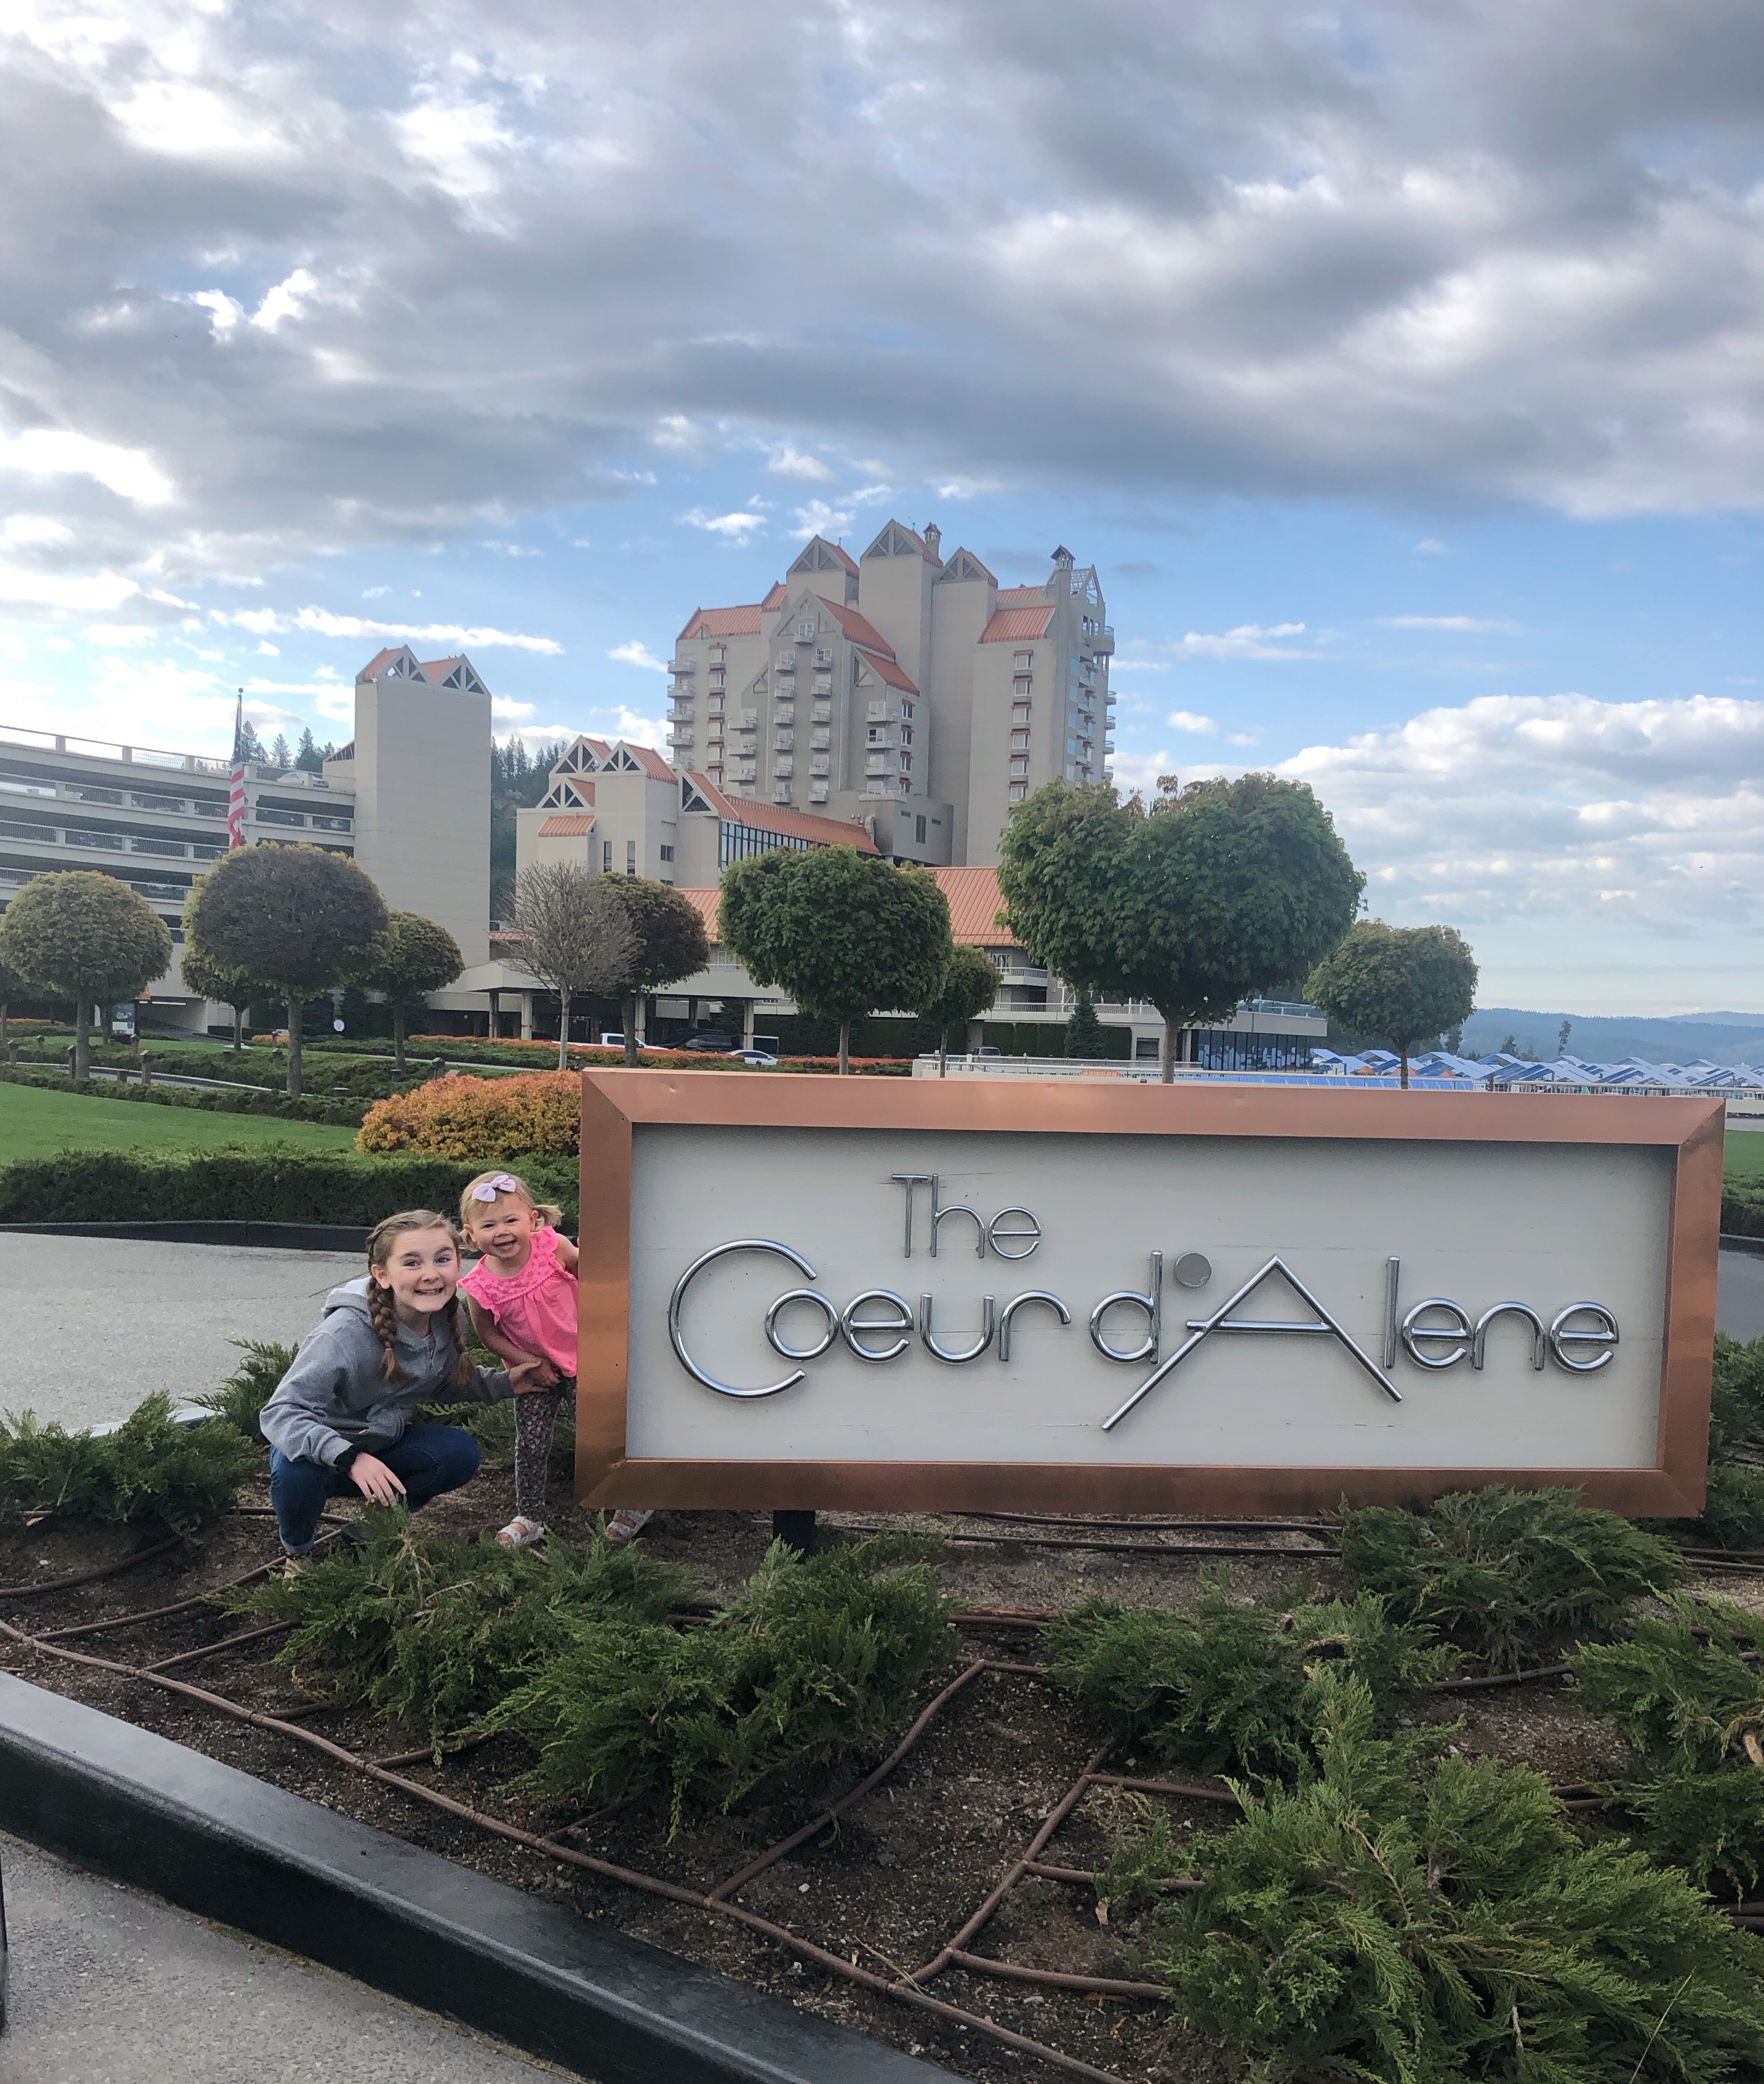 Our Family Getaway to The Coeur d’Alene Resort